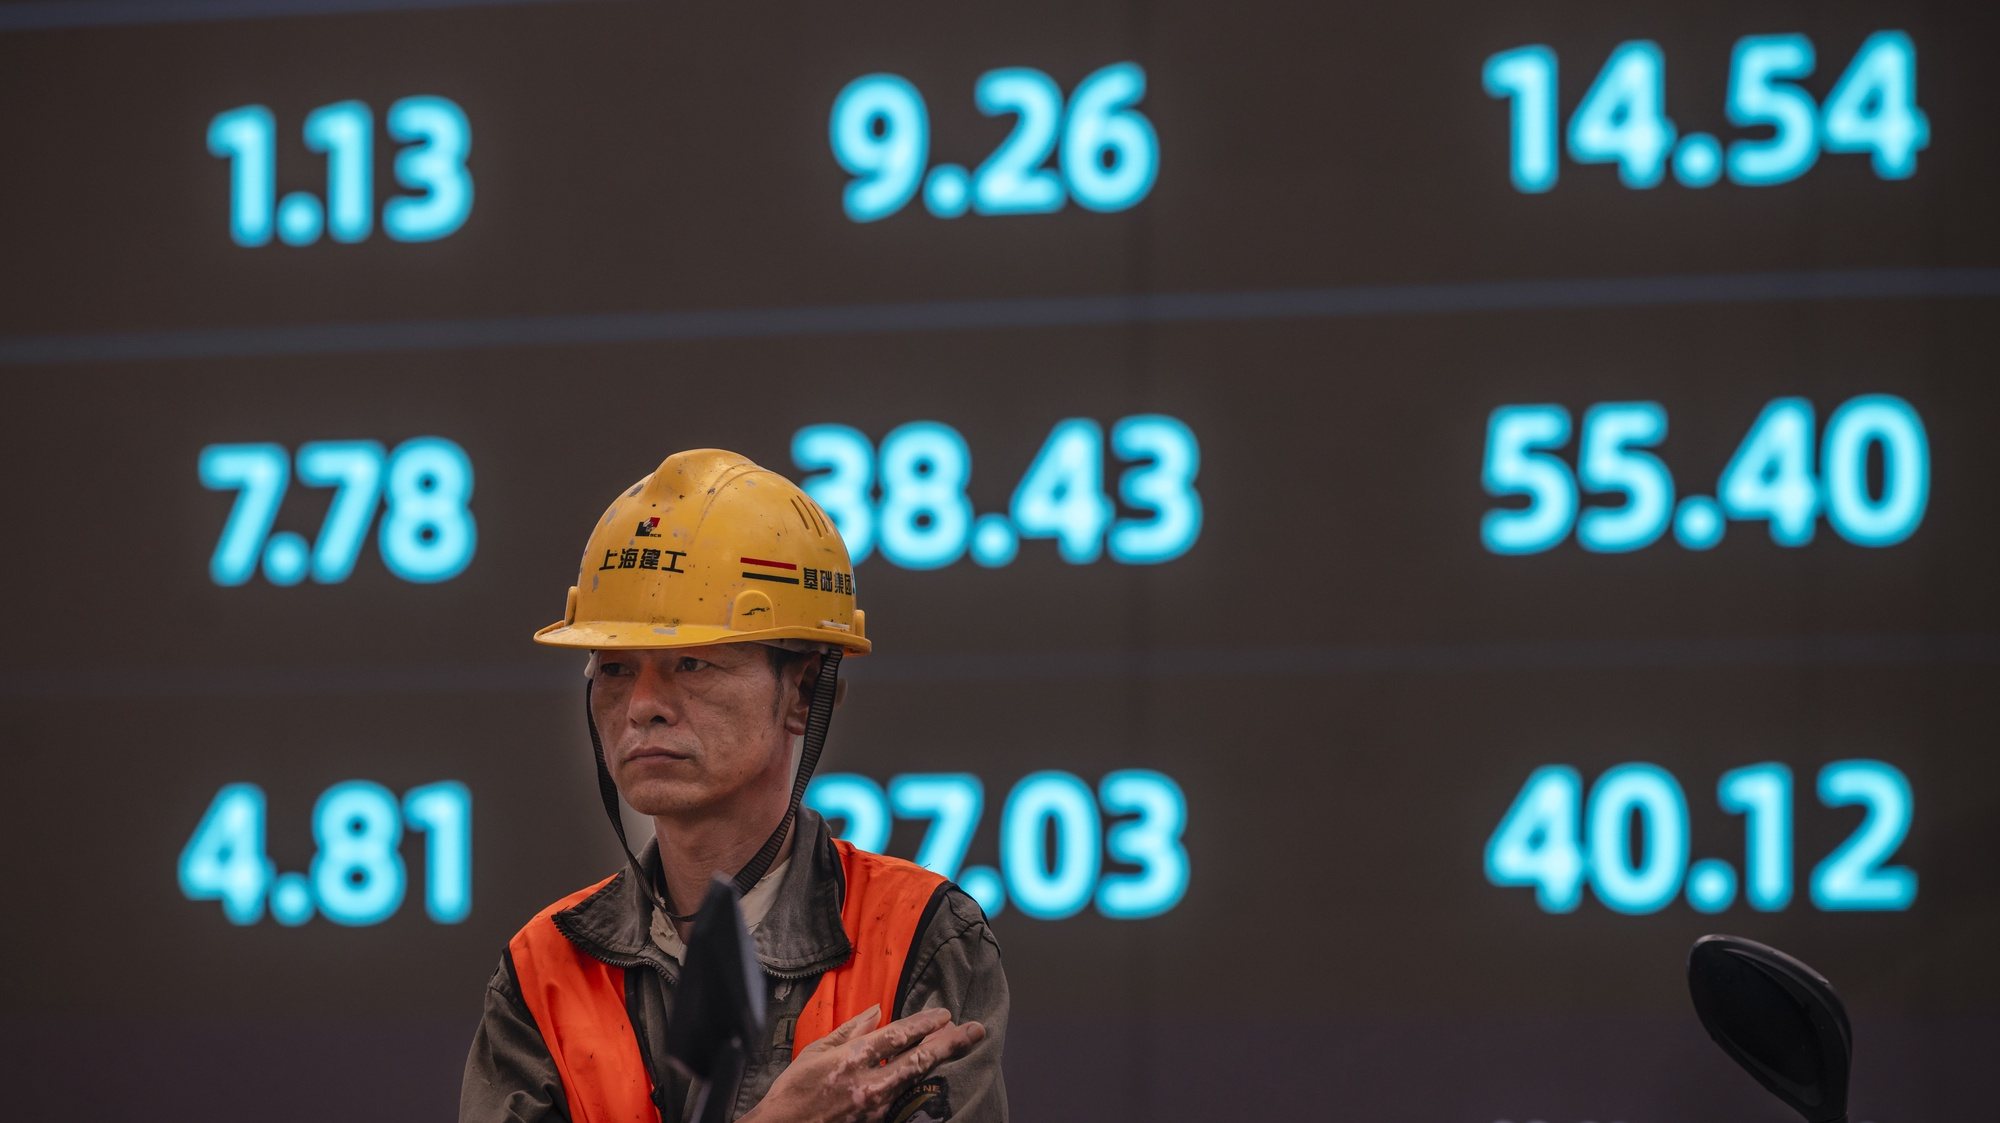 epa09510804 A worker stands in front of the screen showing newest stock exchange and economic data in Shanghai, China, 07 October 2021. A debt crisis and rising bond yields of China Evergrande Group made a whirlwind for other Chinese real estate developers who suspended their stock trading this week in the Hong Kong market. There are concerns and speculations in the Hong Kong stock market over the uncertainty and market value.  EPA/ALEX PLAVEVSKI